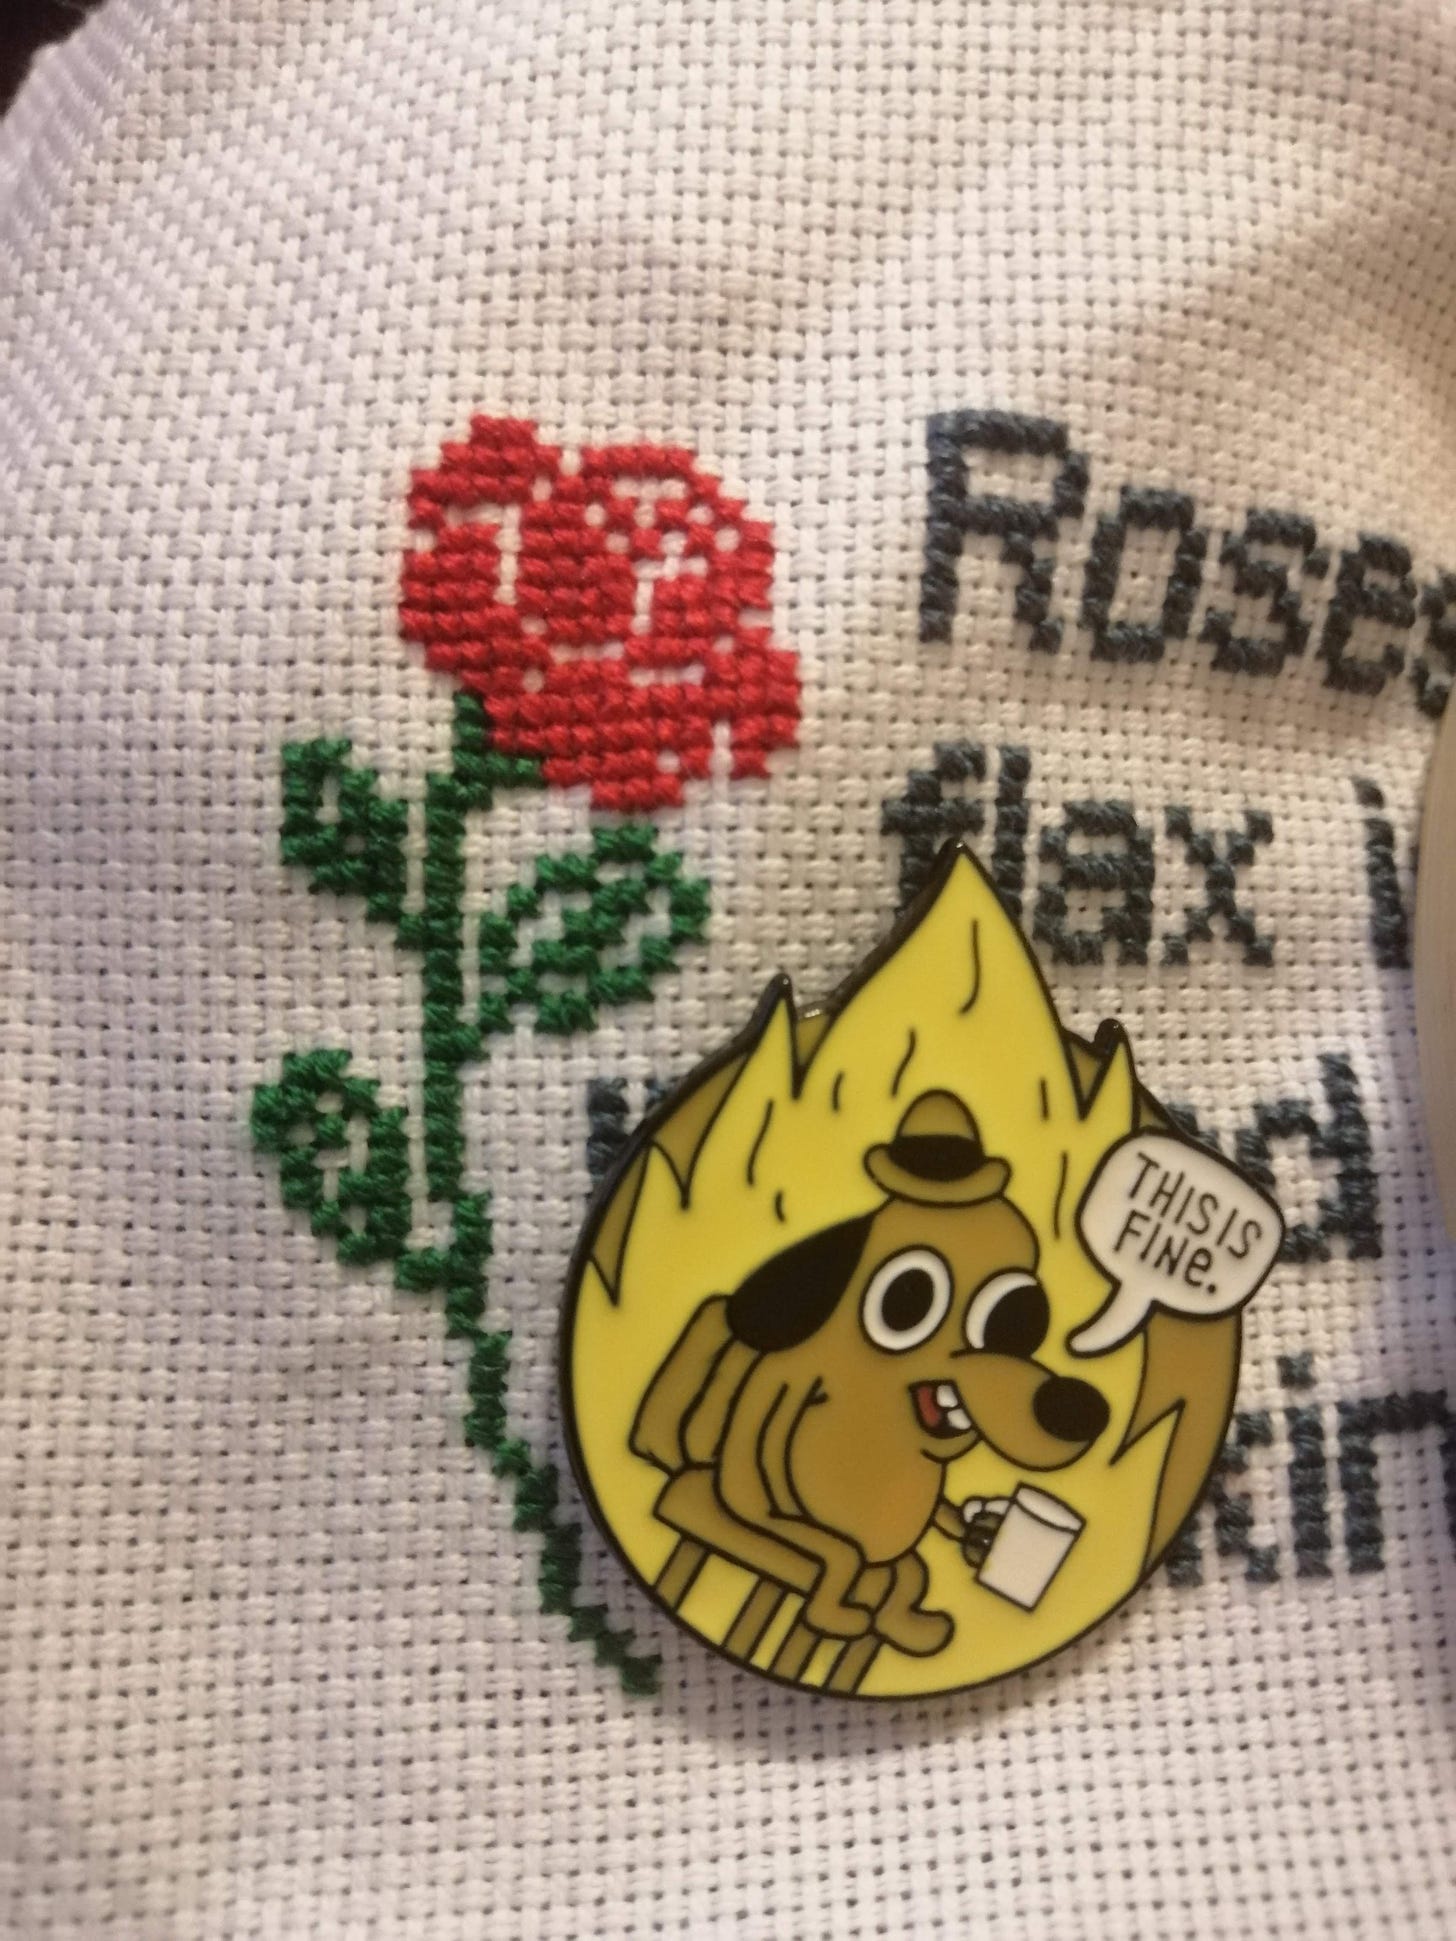 Close up of the above stitch in progress with a needle minder with the dog in the house on fire "This is fine" meme